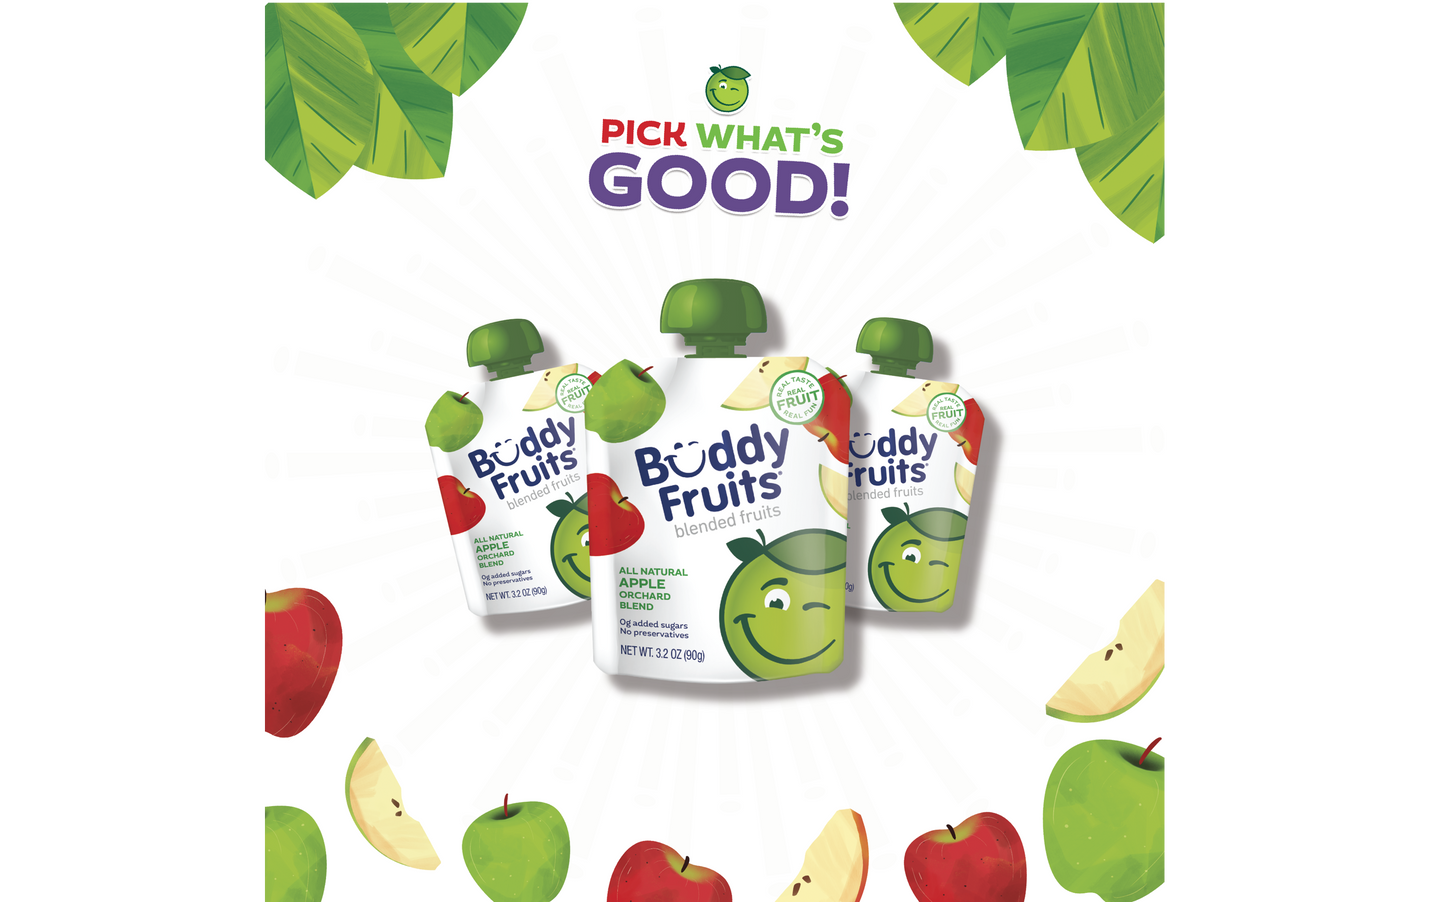 Buddy Fruits Apple Orchard Blend: Pick what's good!